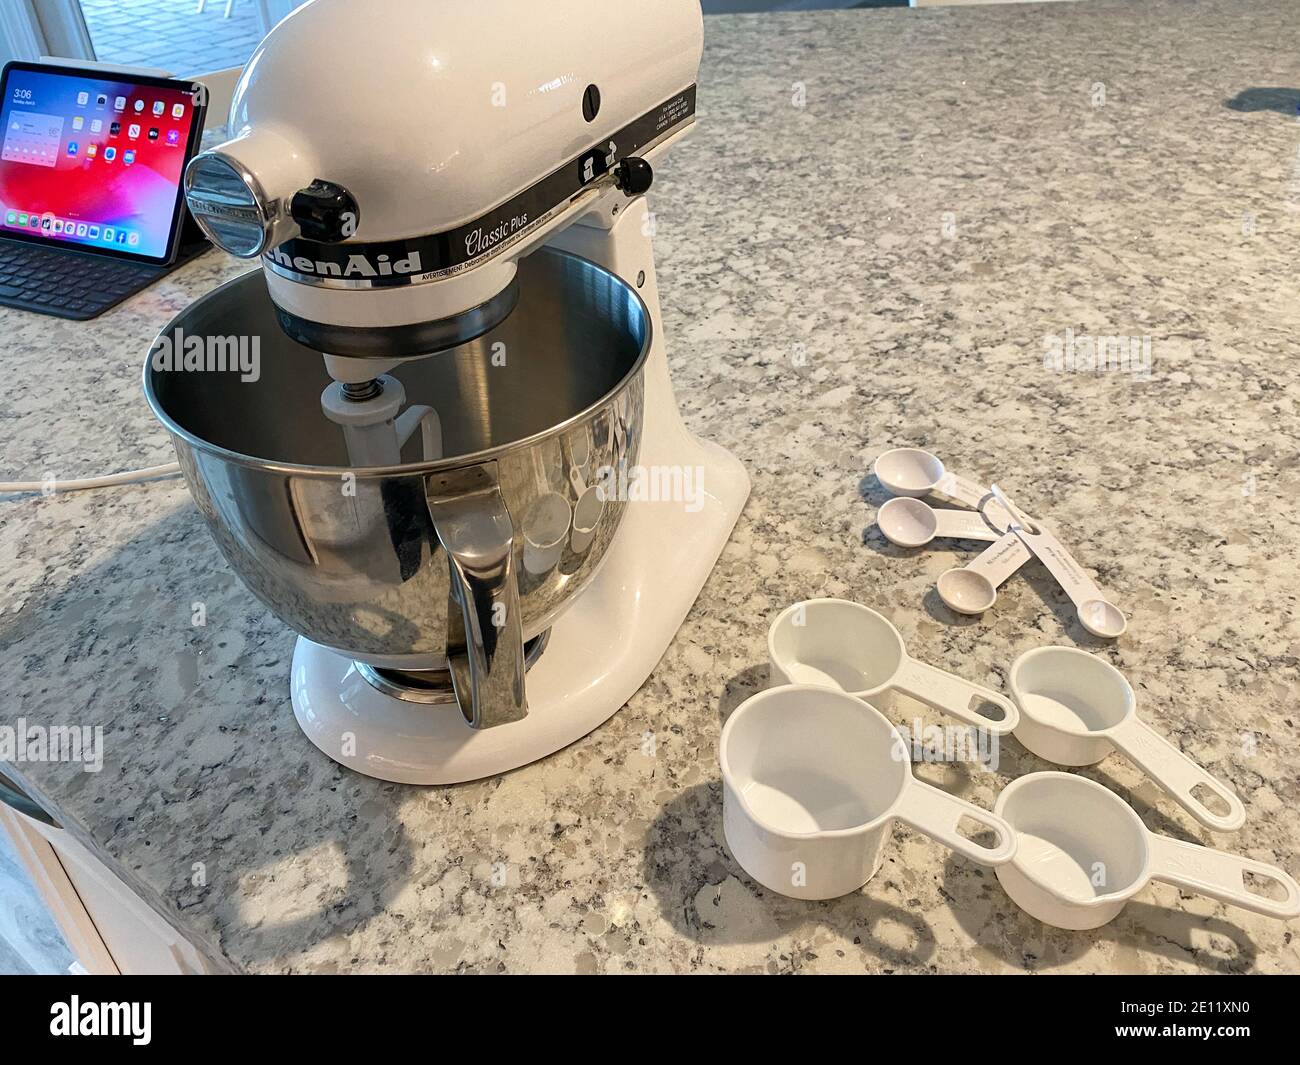 https://c8.alamy.com/comp/2E11XN0/orlando-fl-usa-april-5-2020-a-kitchenaid-mixer-on-a-kitchen-counter-with-measuring-cups-and-spoons-sitting-next-to-it-2E11XN0.jpg